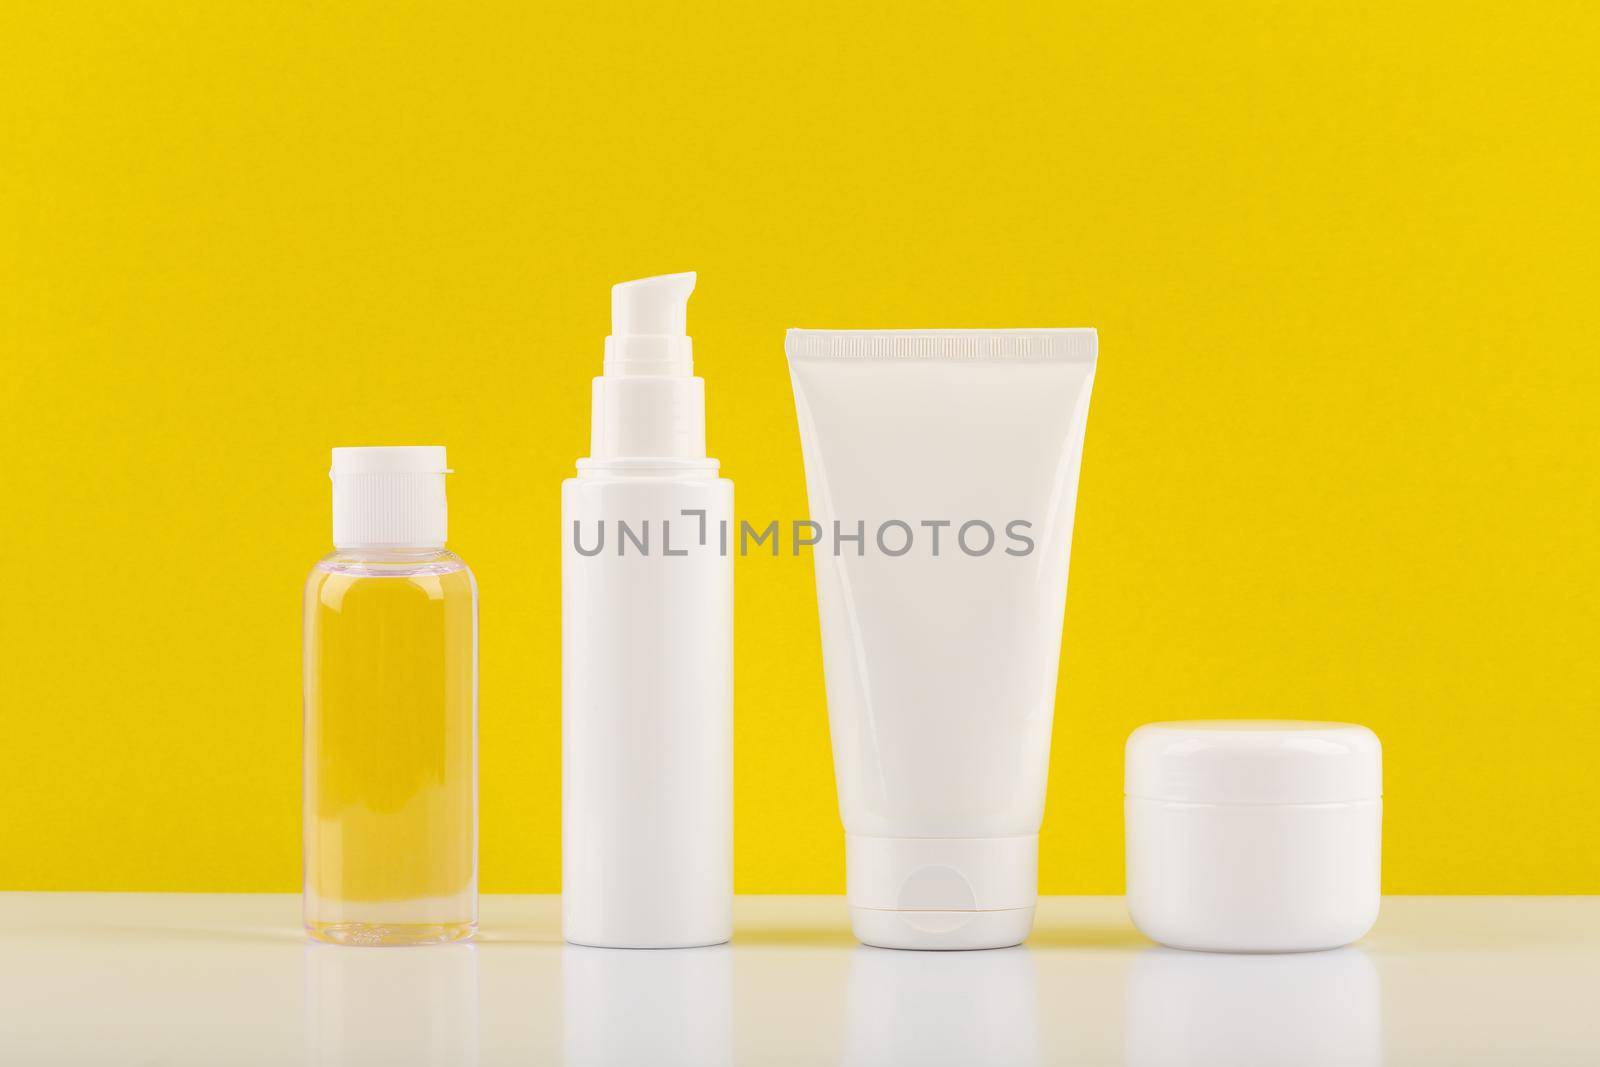 Still life with a set of cosmetic products on white table against bright yellow background. Concept of daily skincare or summer skin care